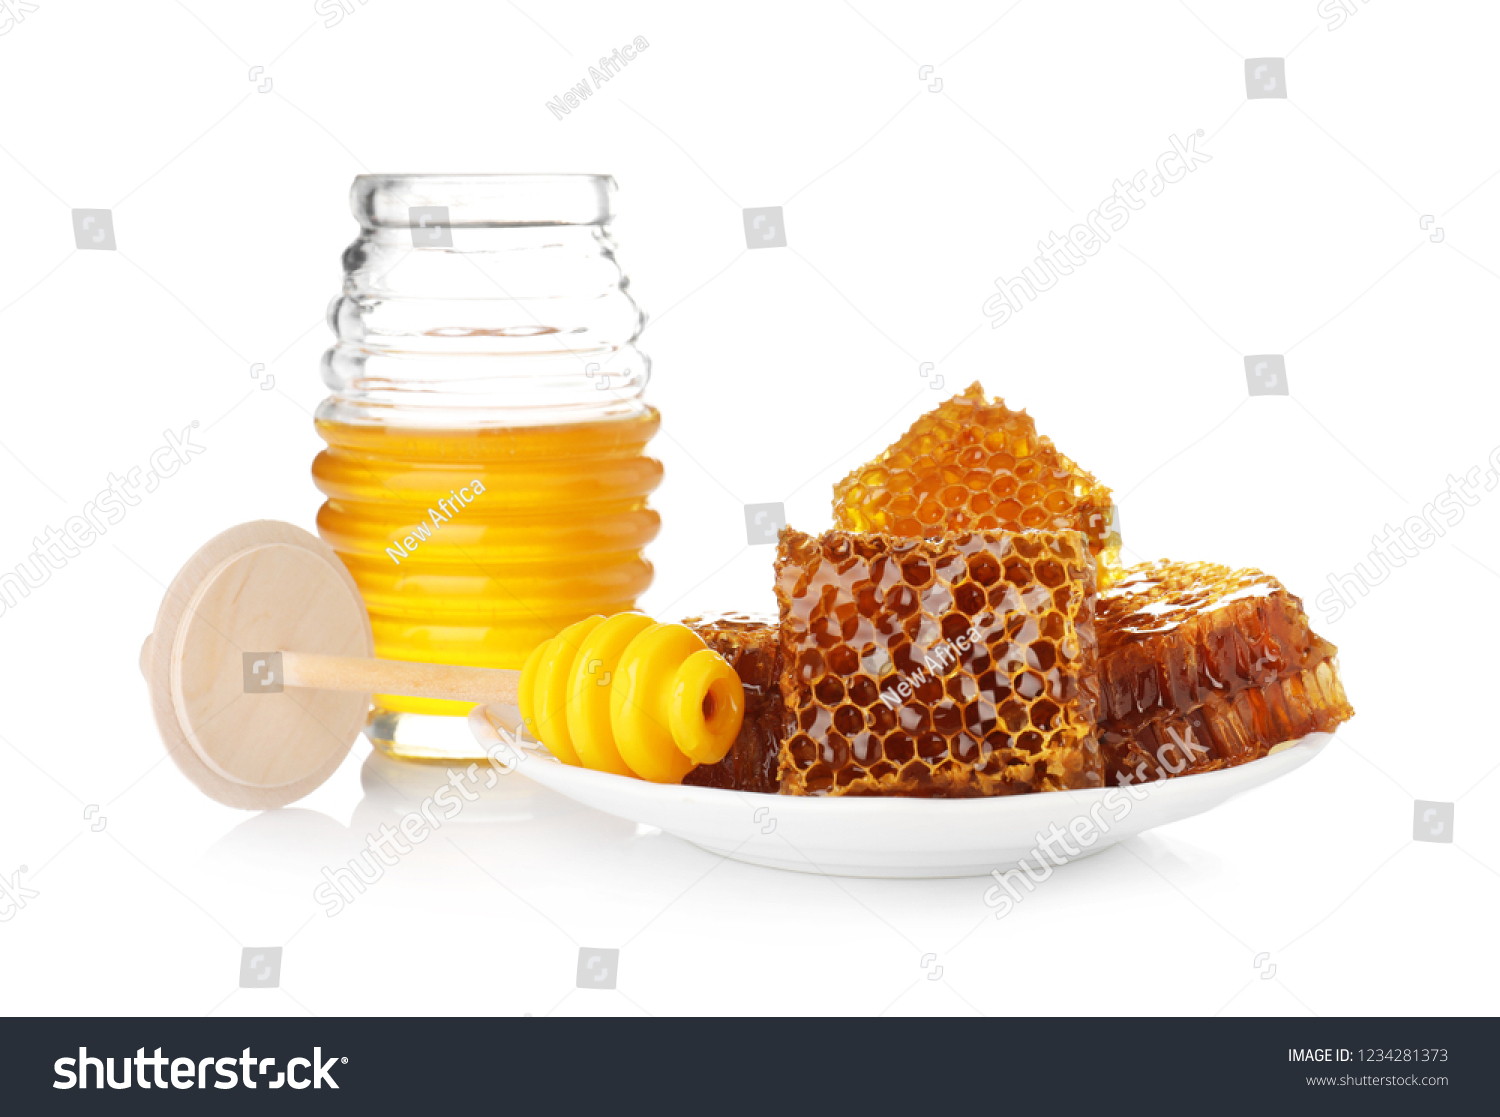 Composition with jar of honey on white background #1234281373